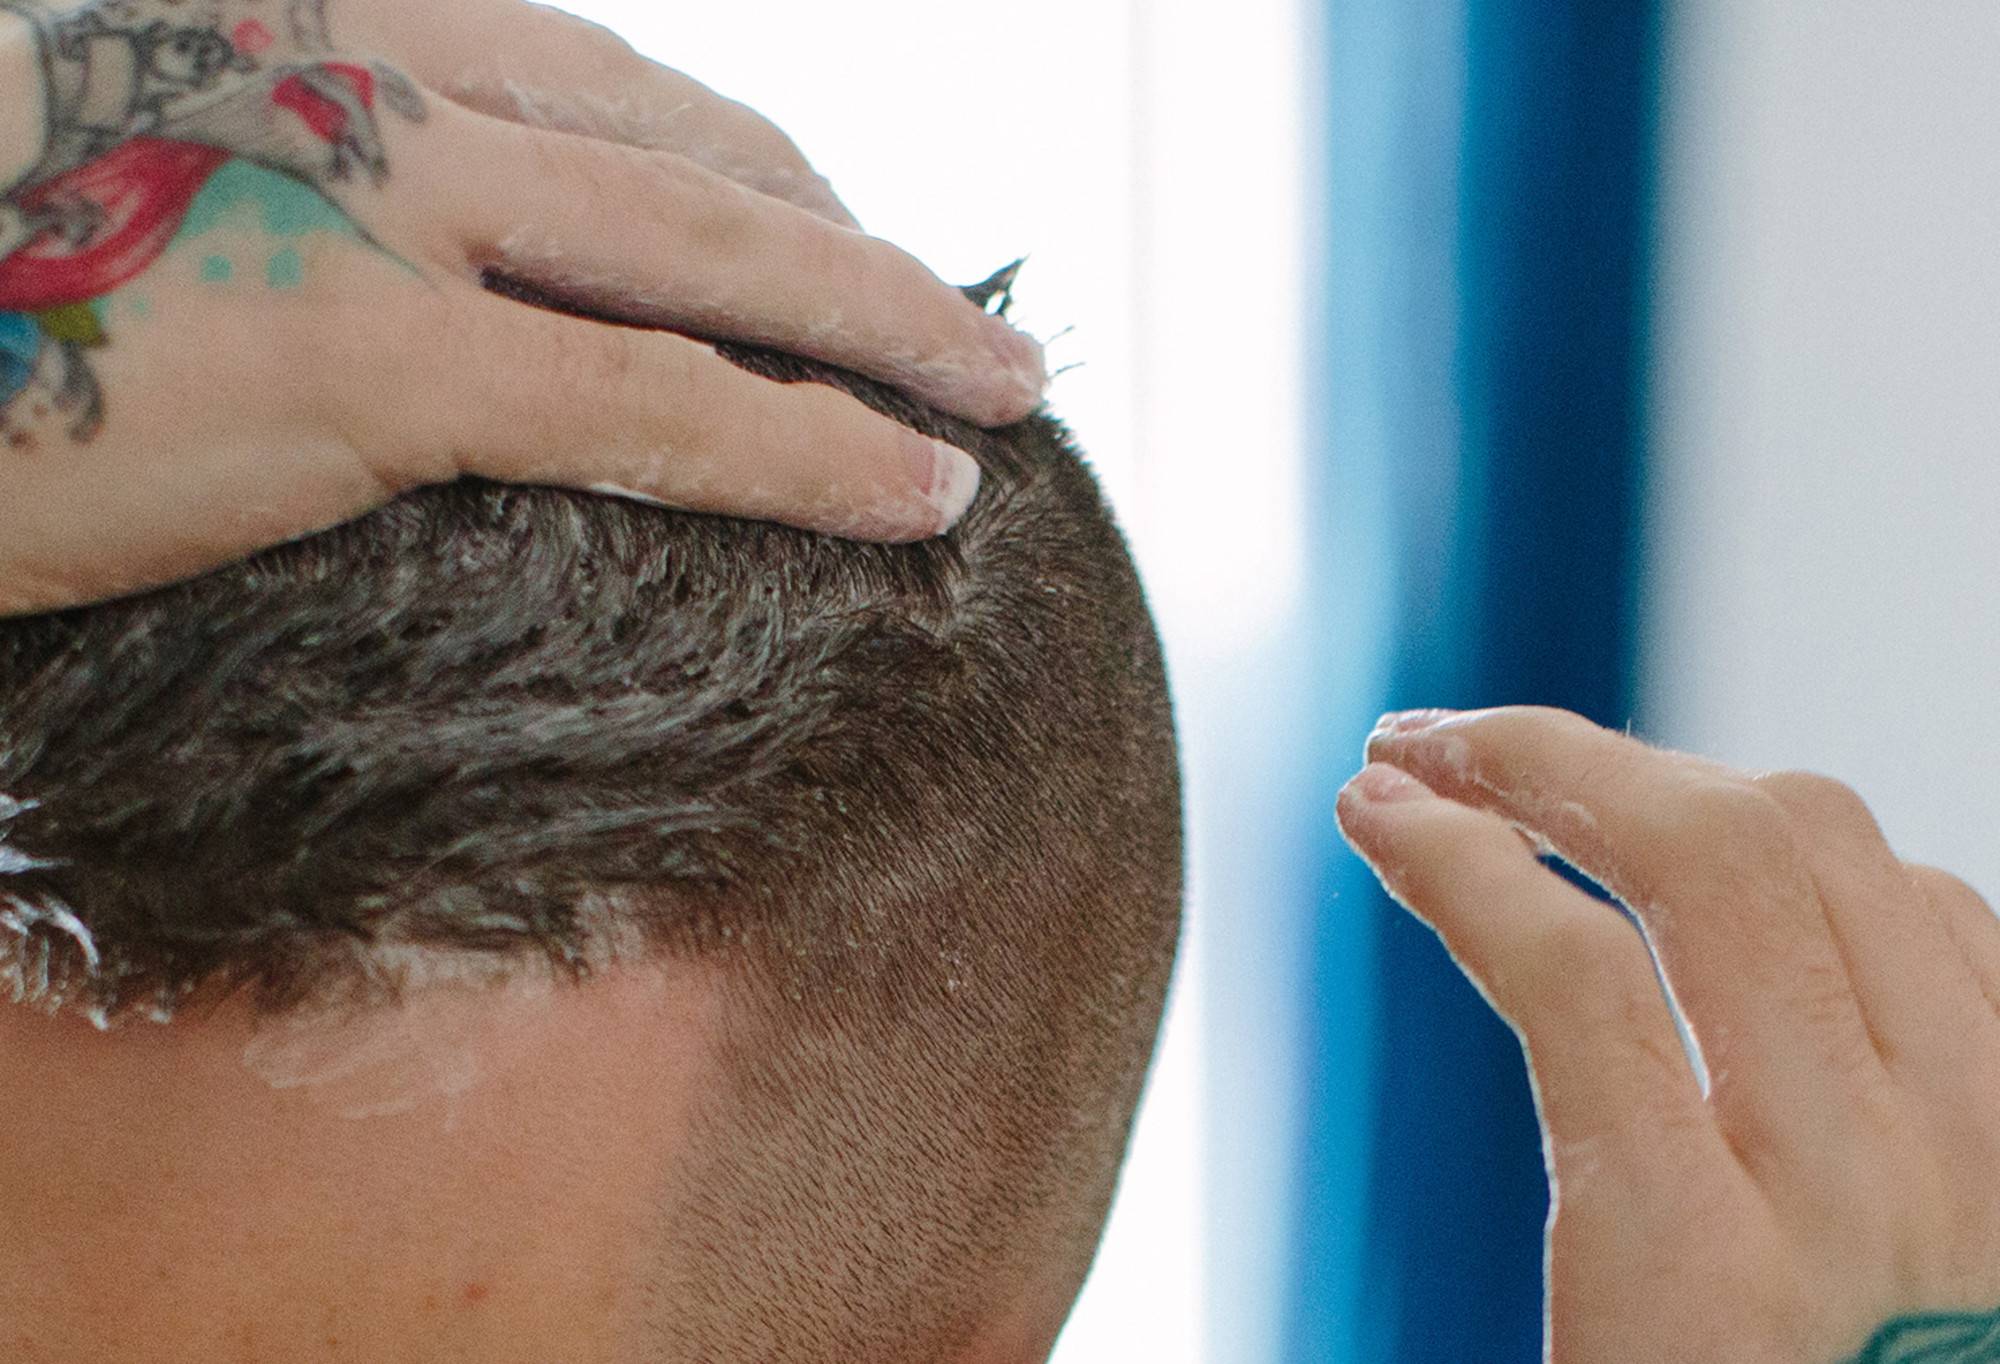 A person with short hair, shaved sides and tatoos rubs Roots, a creamy hair treatment, through the top section of their hair.